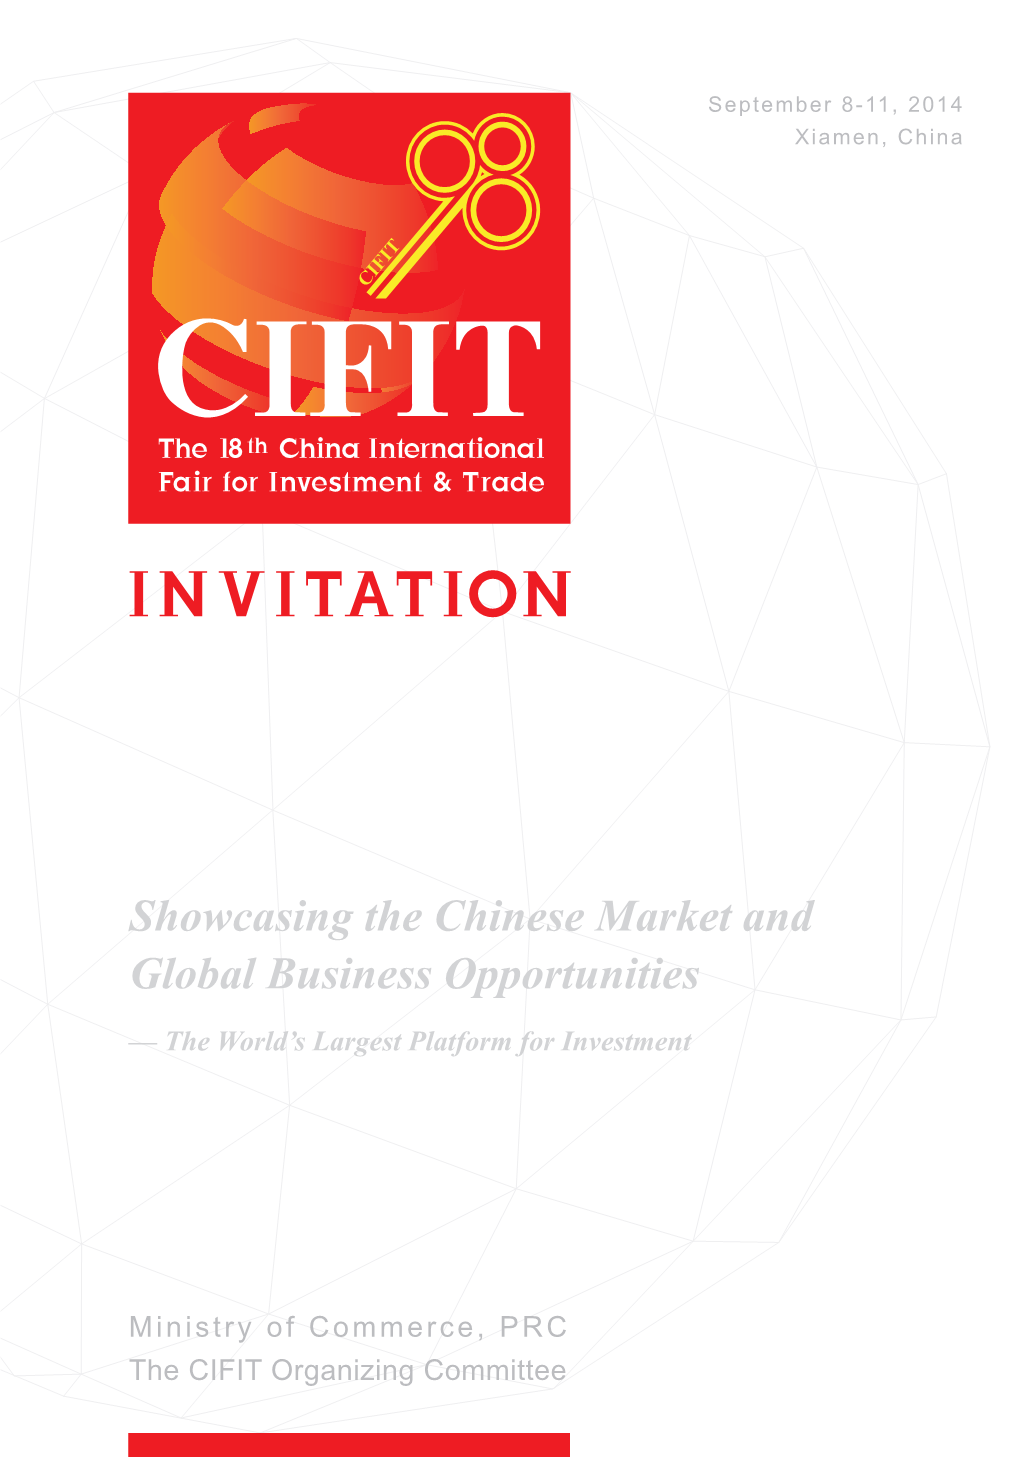 Ministry of Commerce, PRC the CIFIT Organizing Committee